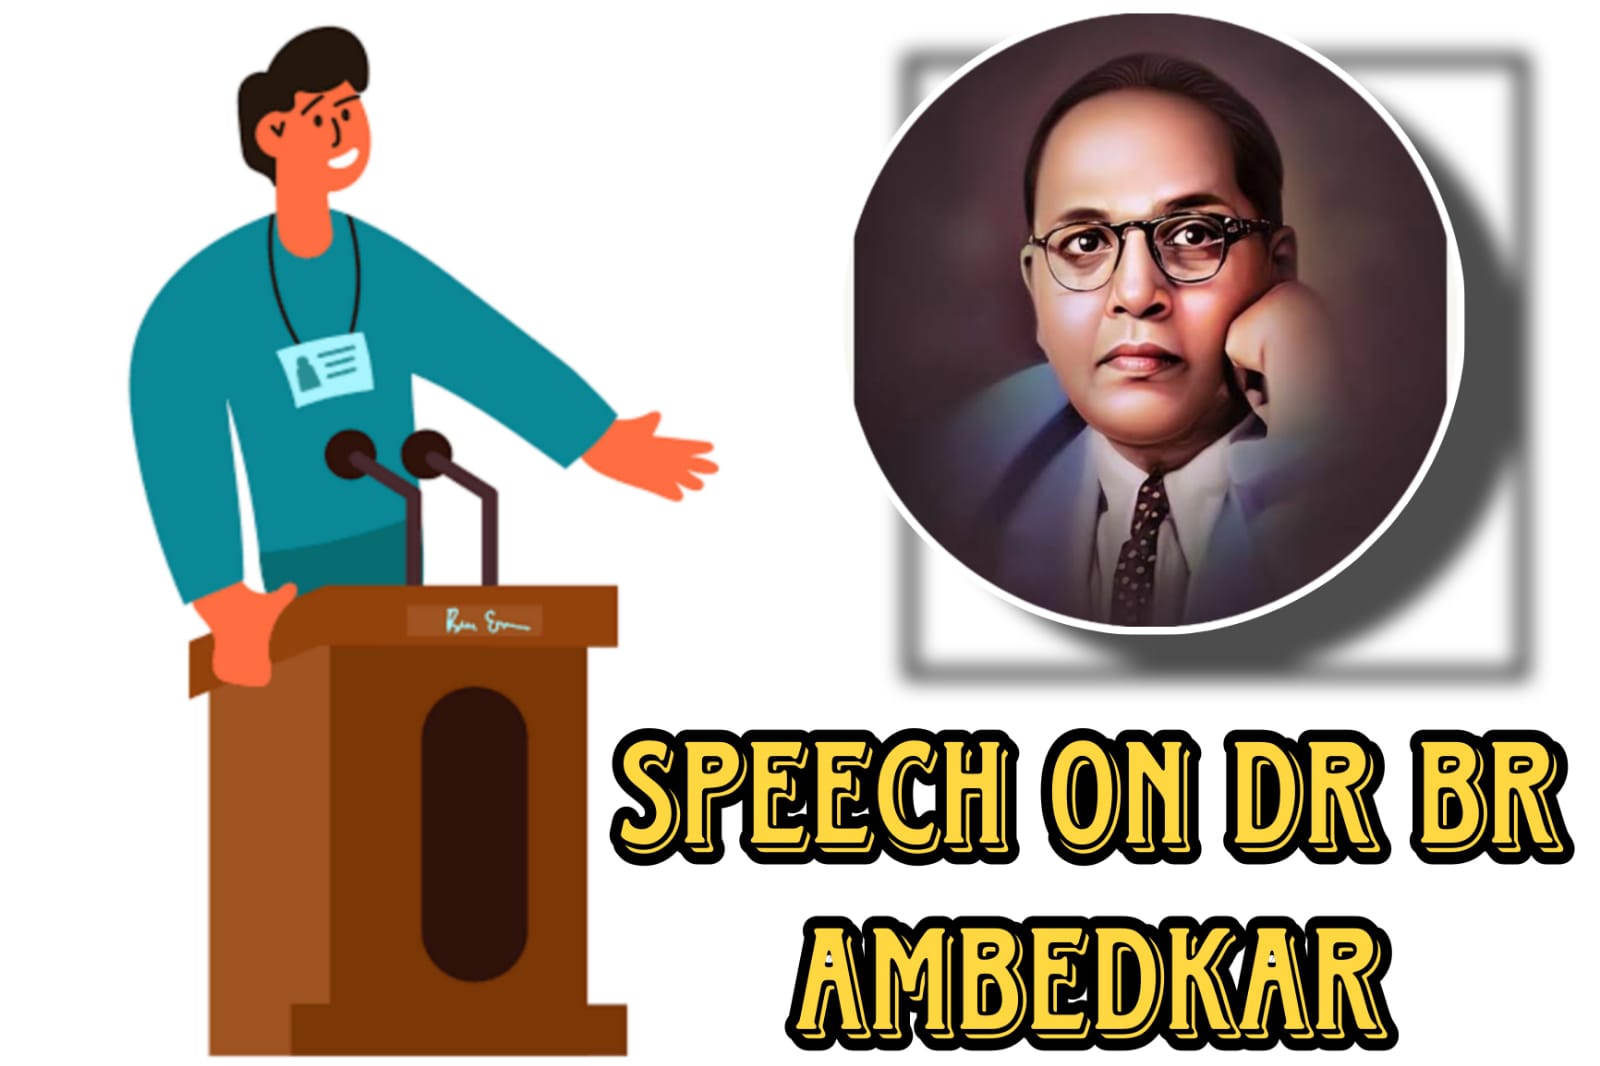 AmbedkarJayanti Empowerment CasteReform EducationForAll HumanRights Ambedkar'sLegacy ProgressiveIdeals EqualityForAll SocialInclusion RememberingAmbedkar InspirationalLeader Feel free to include these tags in your post to highlight the key aspects and contributions of B.R. Ambedkar.